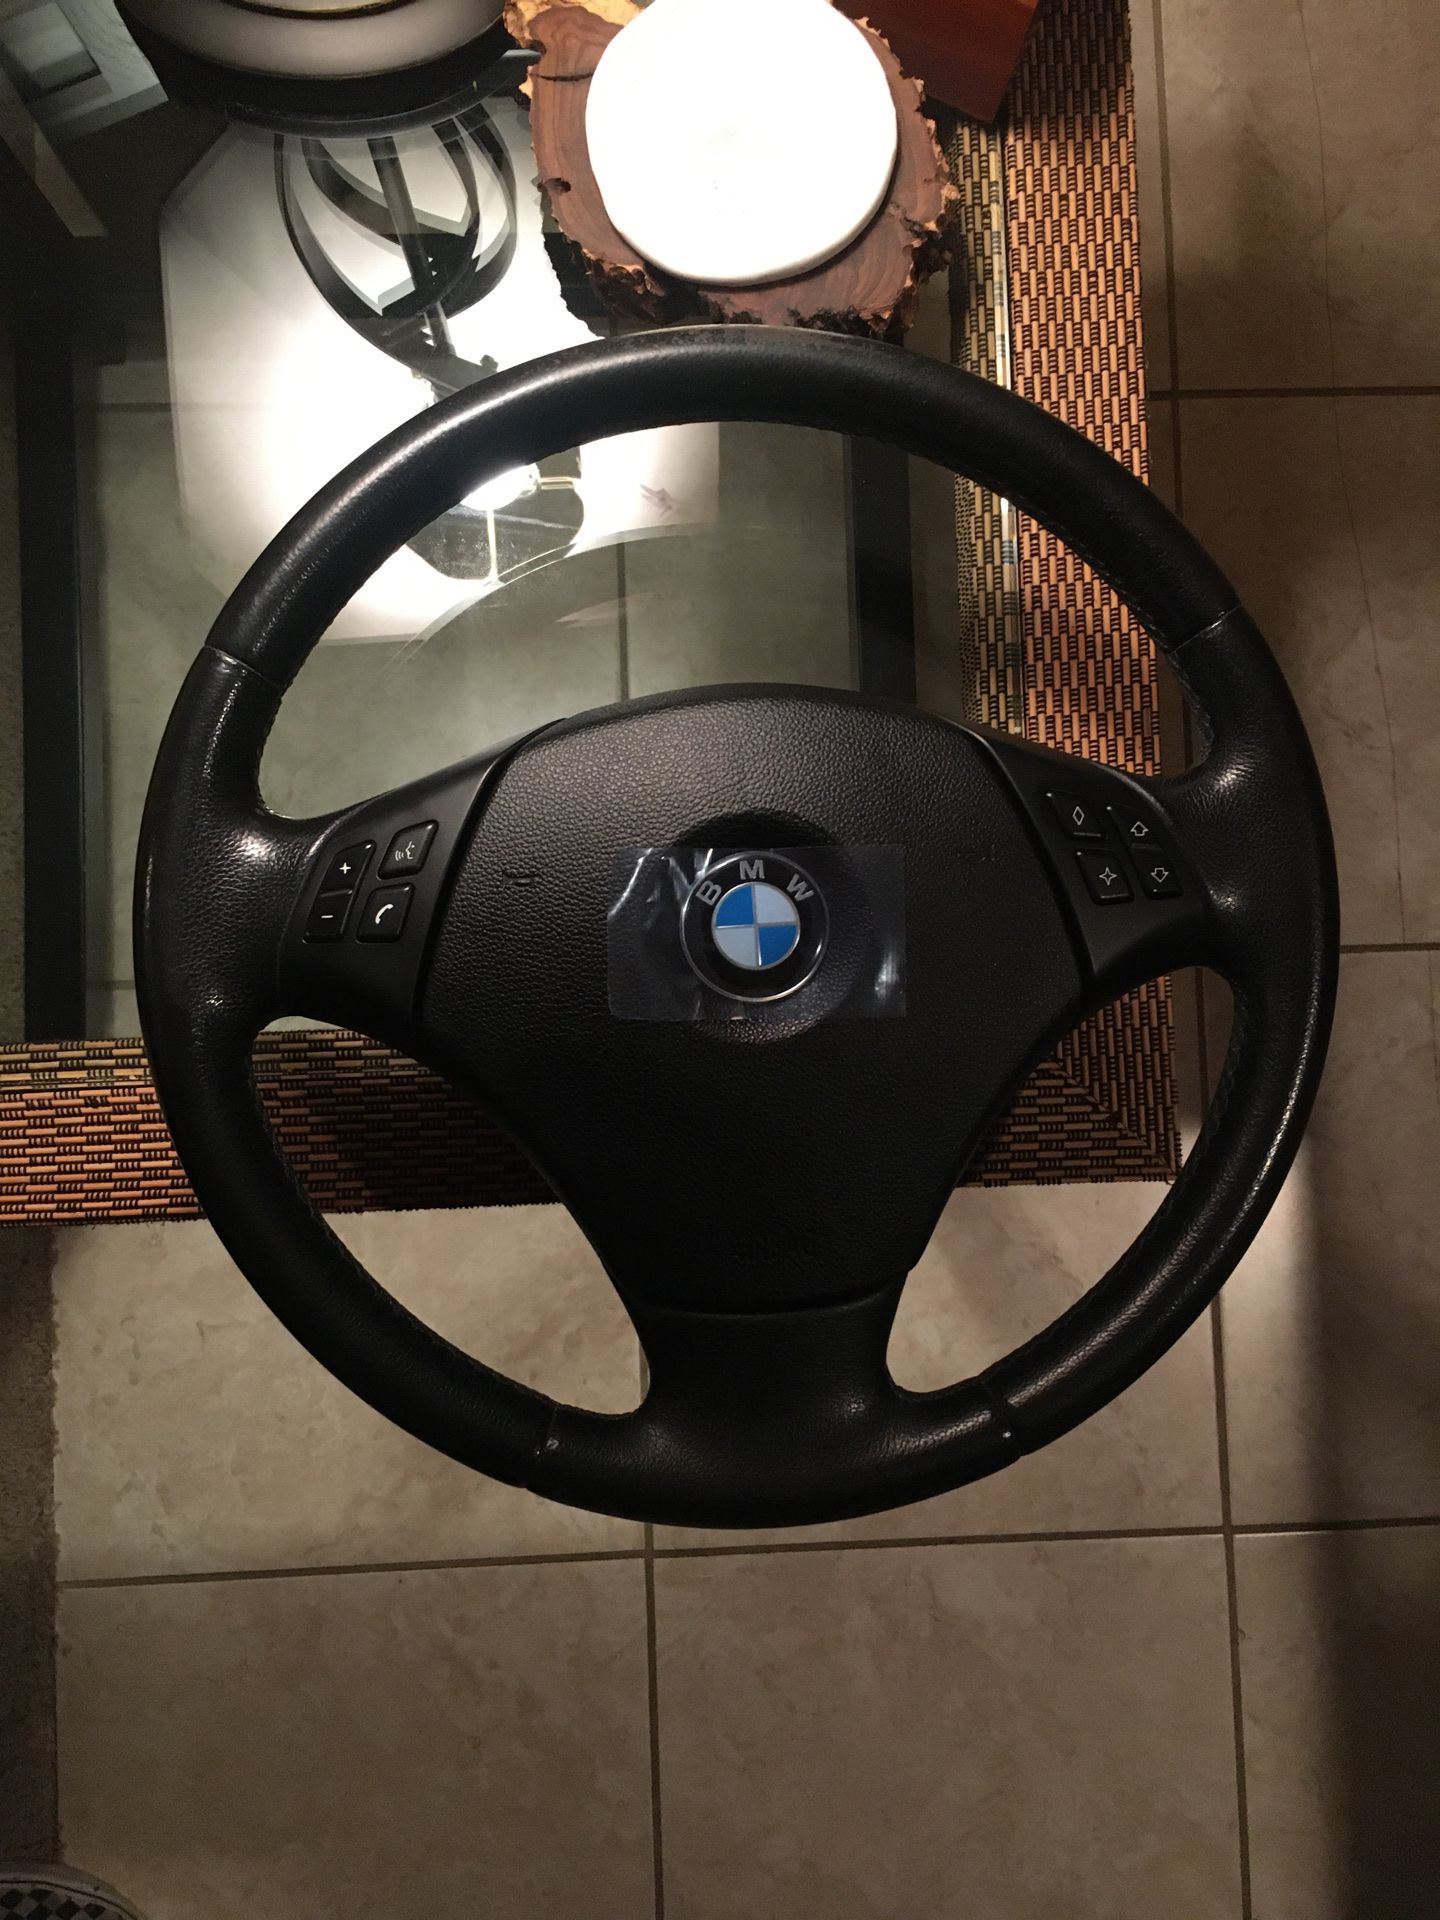 BMW E90 steering wheel (with airbag)